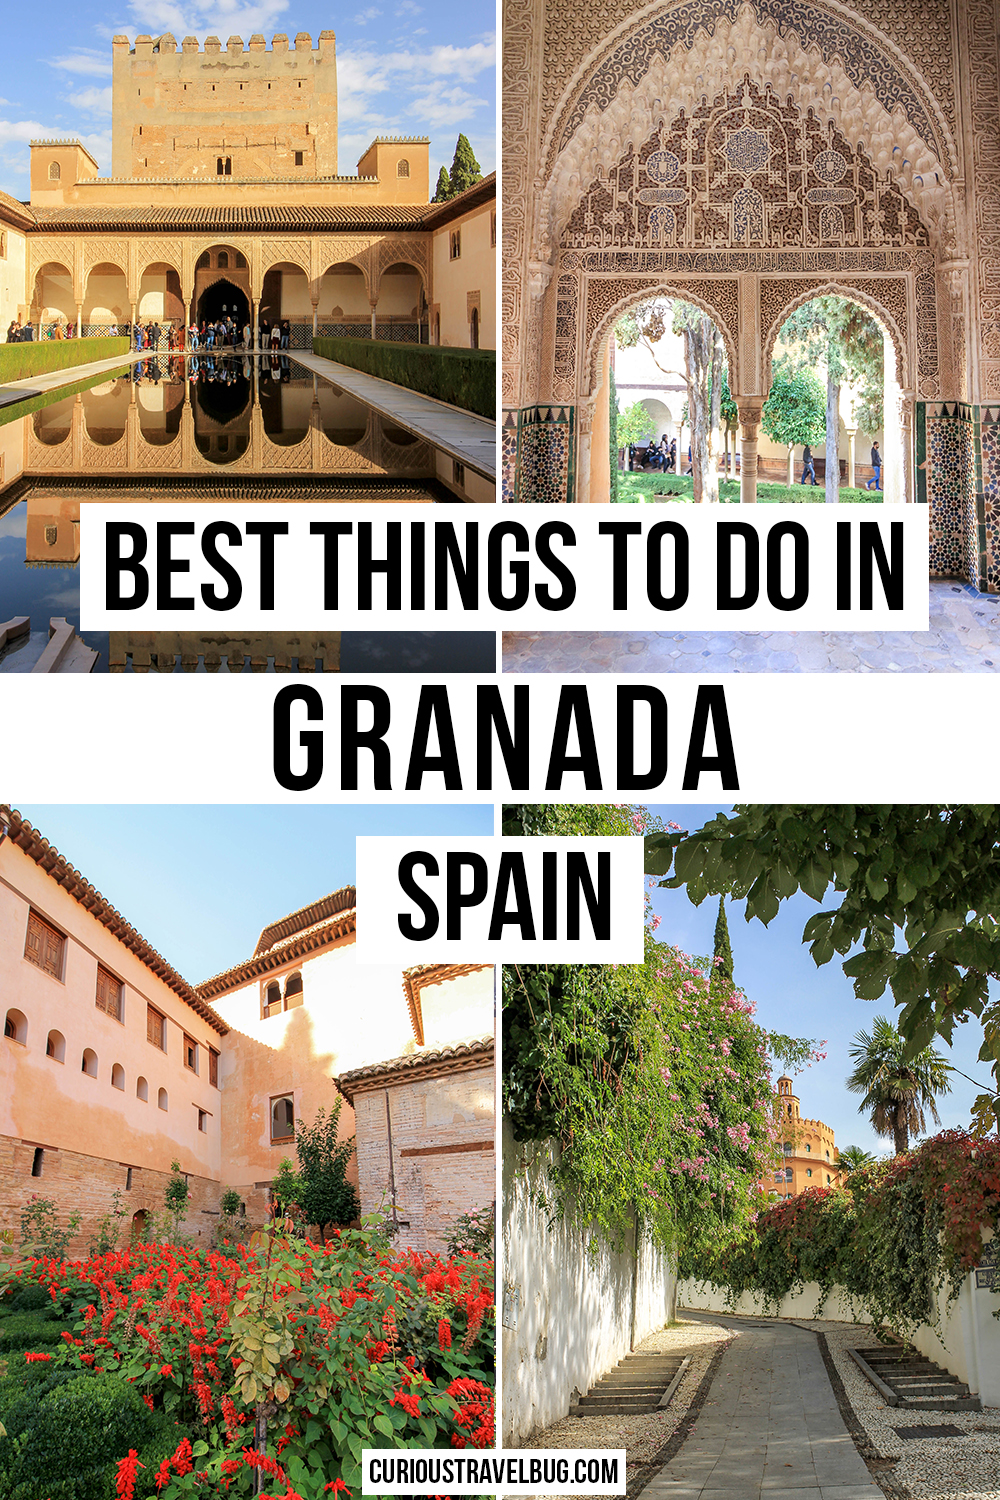 All the best things to do in Granada, Spain. This full travel guide to the city includes top sights like the Alhambra, Nasrid Palace and Albayzin as well as where to stay in Granada, getting around Granada, things to do near Granada and day trips from Granada. Everything you need for a perfect vacation to Southern Spain